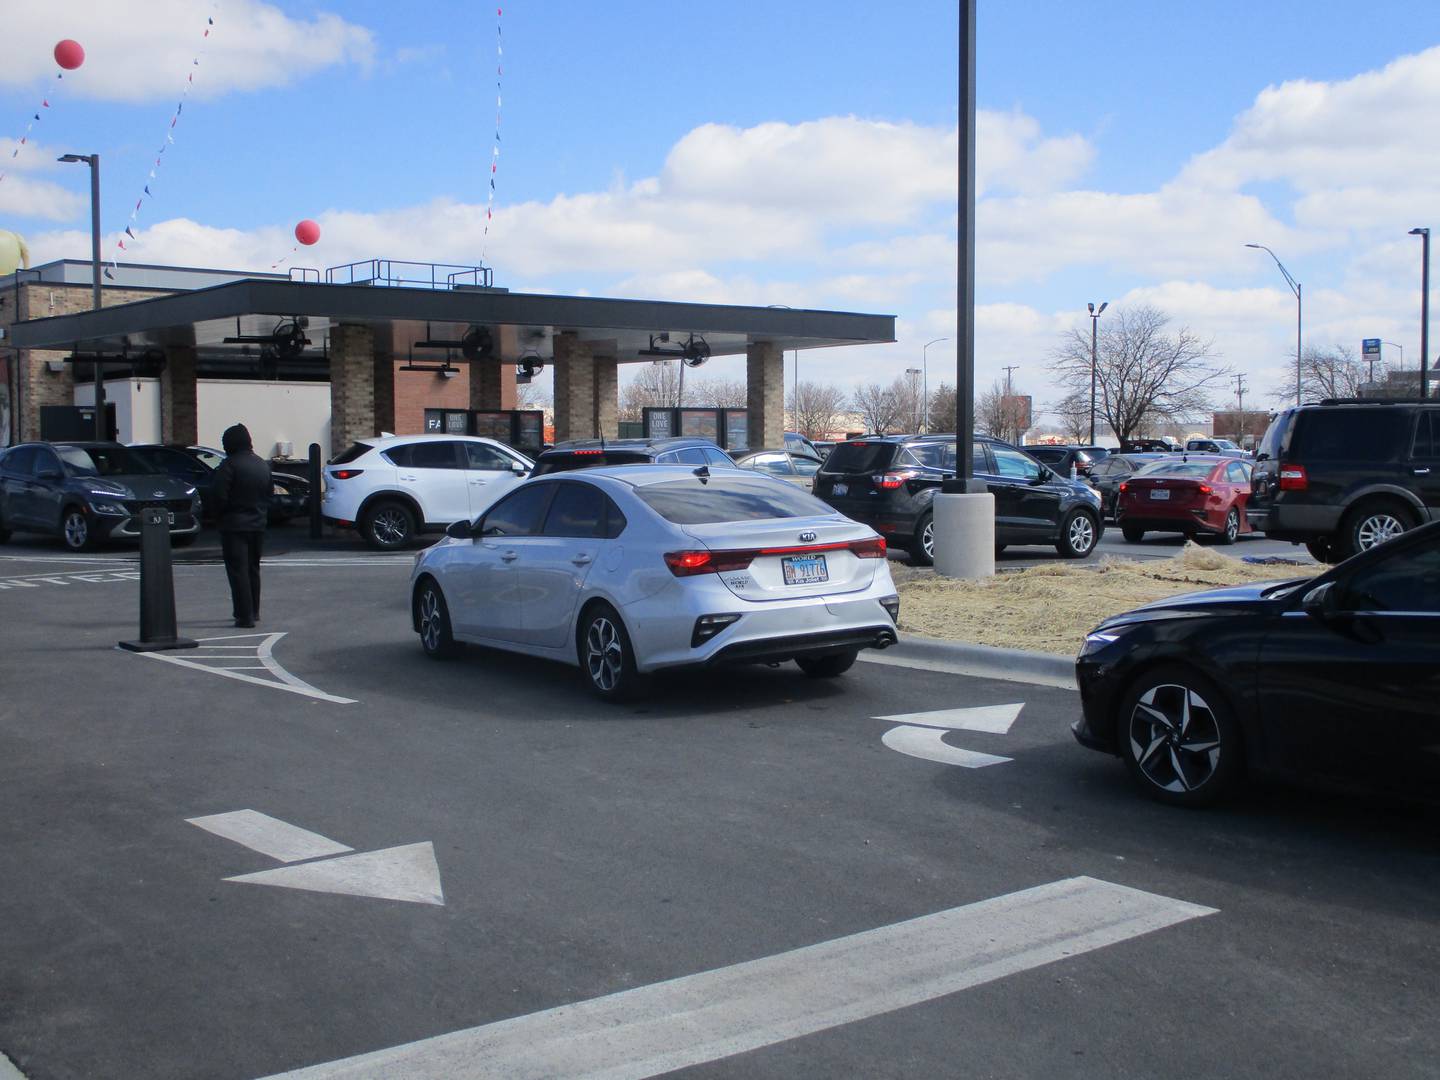 Cars line up for the drive-thru lanes at the Raising Cane's Chicken Fingers restaurant that opened at 3000 Plainfield Road in Joliet on Tuesday, March 8, 2022.